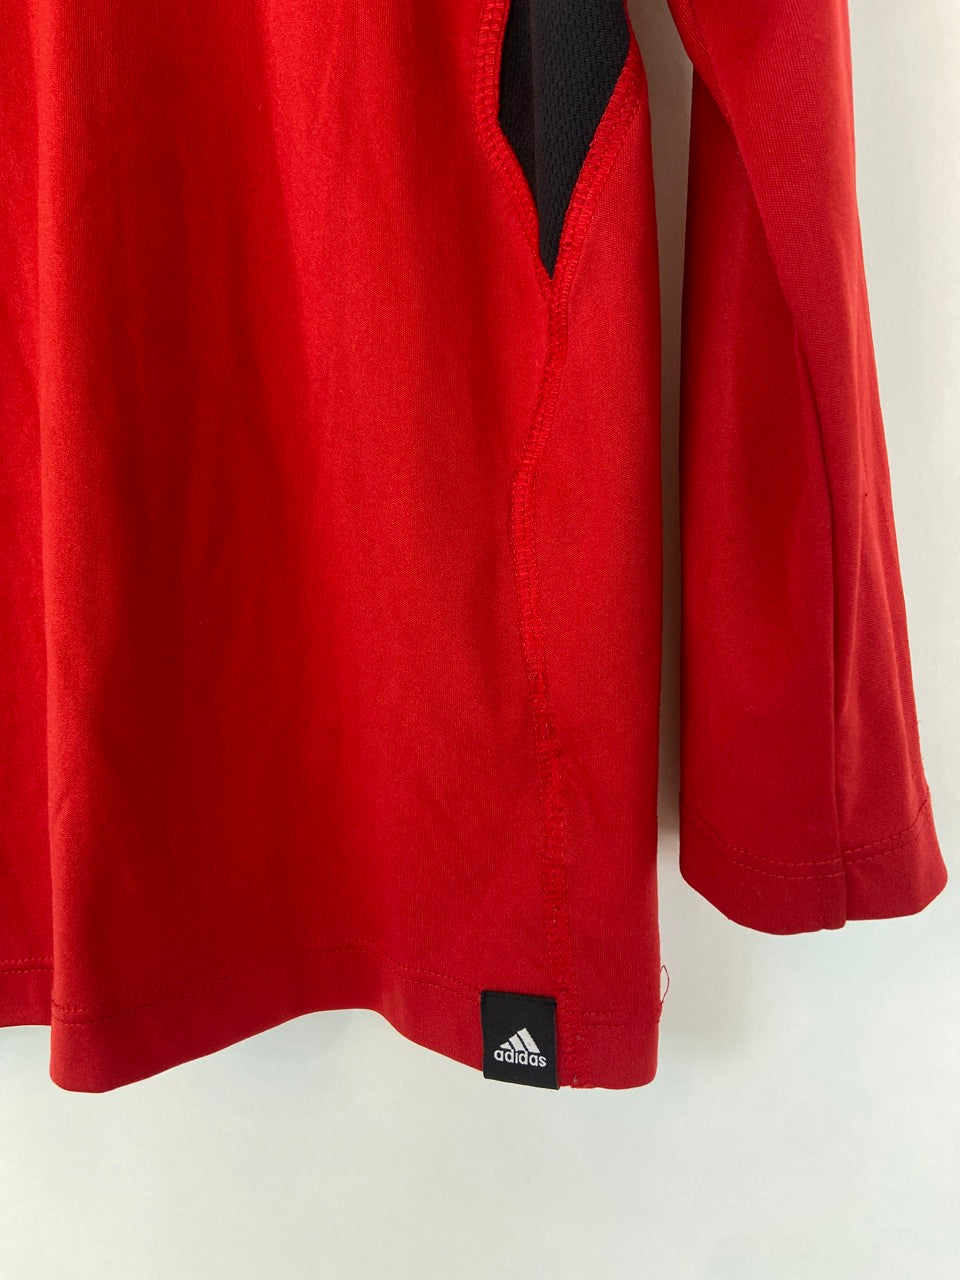 Adidas Red Long Sleeve- Youth S (7)